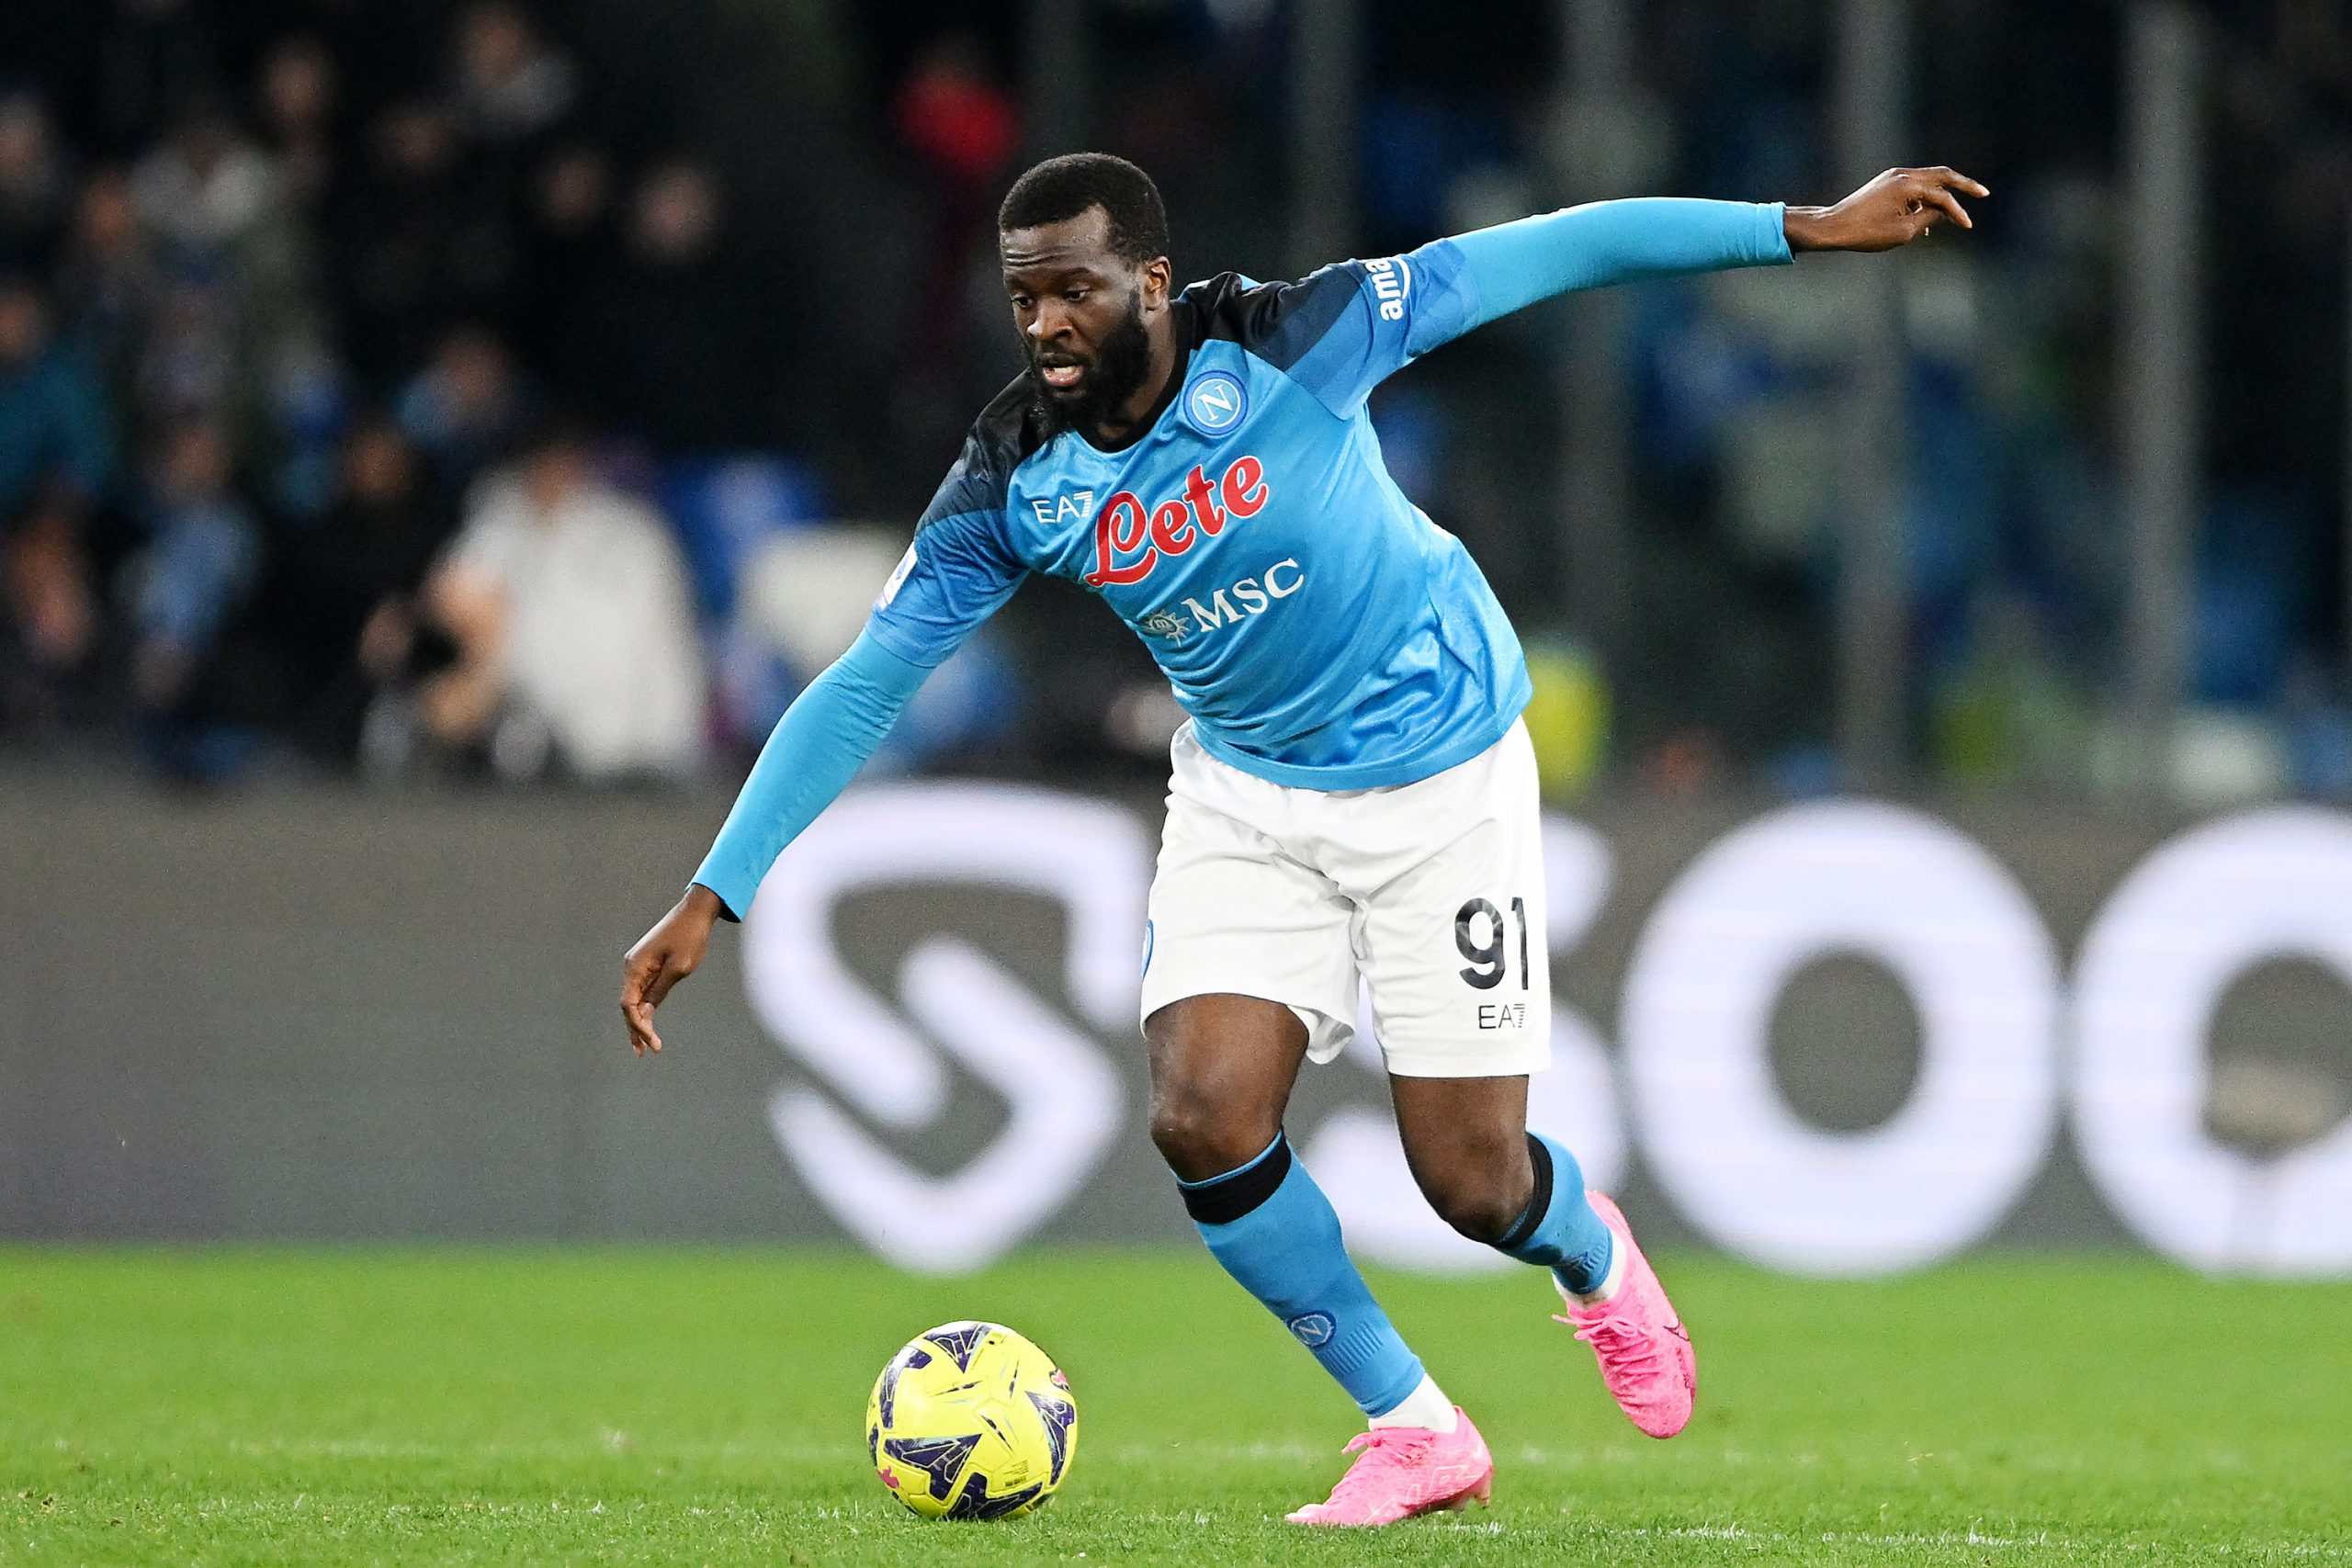 Tanguy Ndombele reveals "no choice" but to leave Tottenham Hotspur for Napoli last summer.